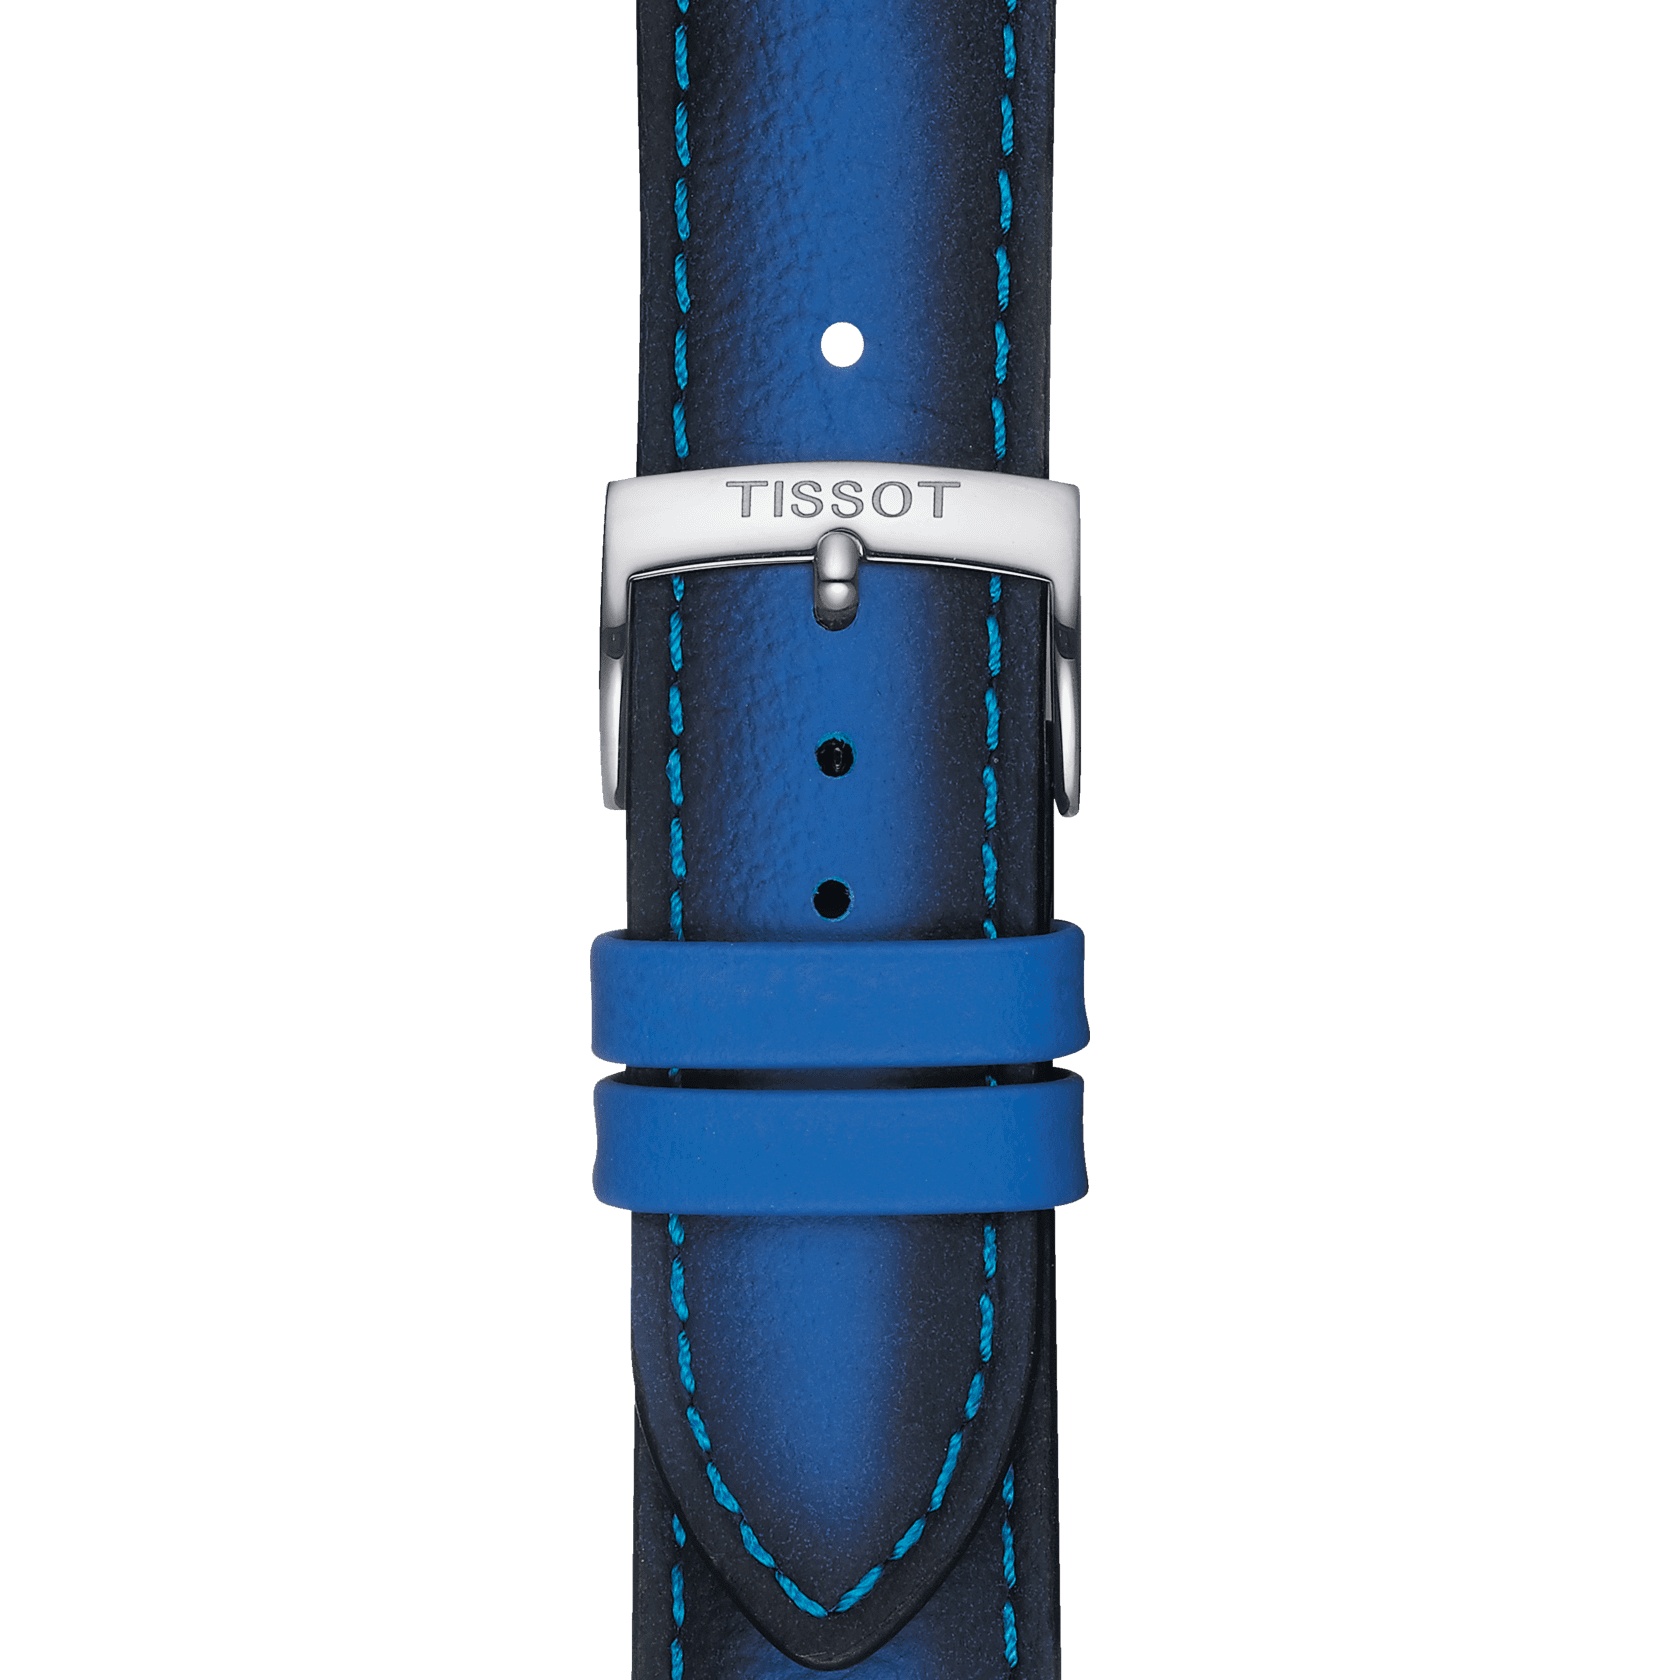 Tissot official blue leather strap lugs 20 mm